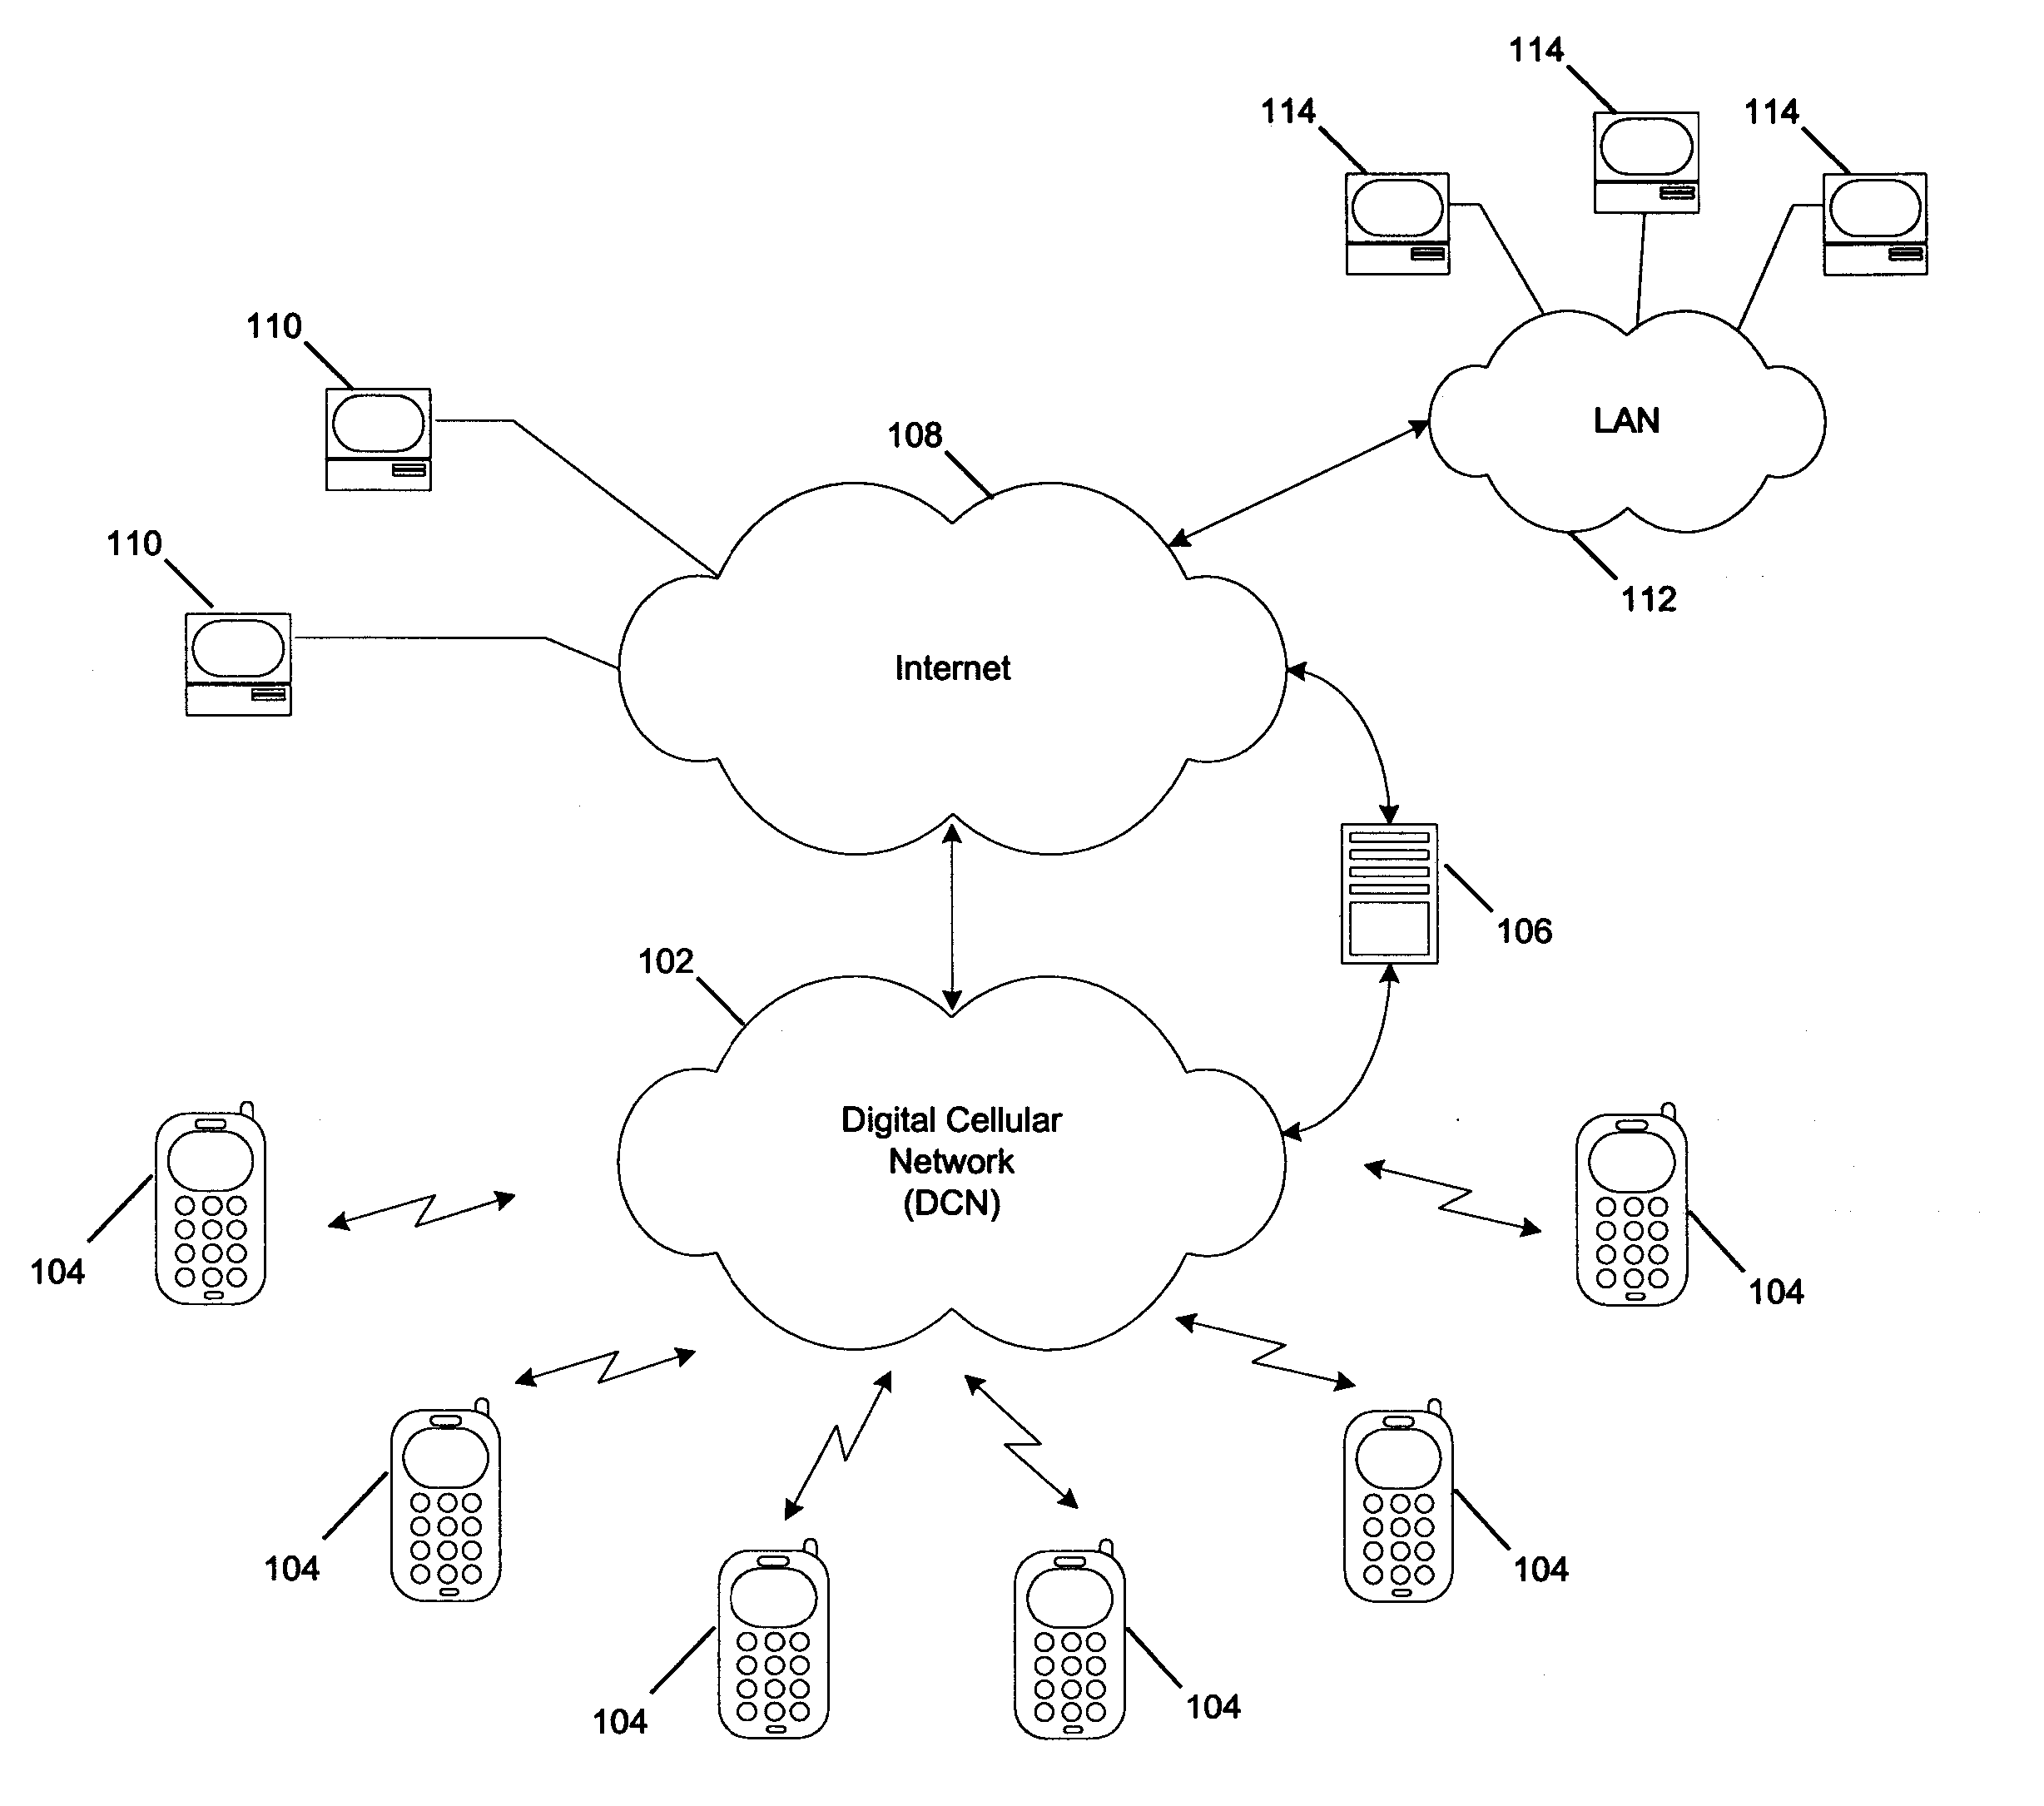 System and Method of Sharing a Contact List Among Mobile Phones